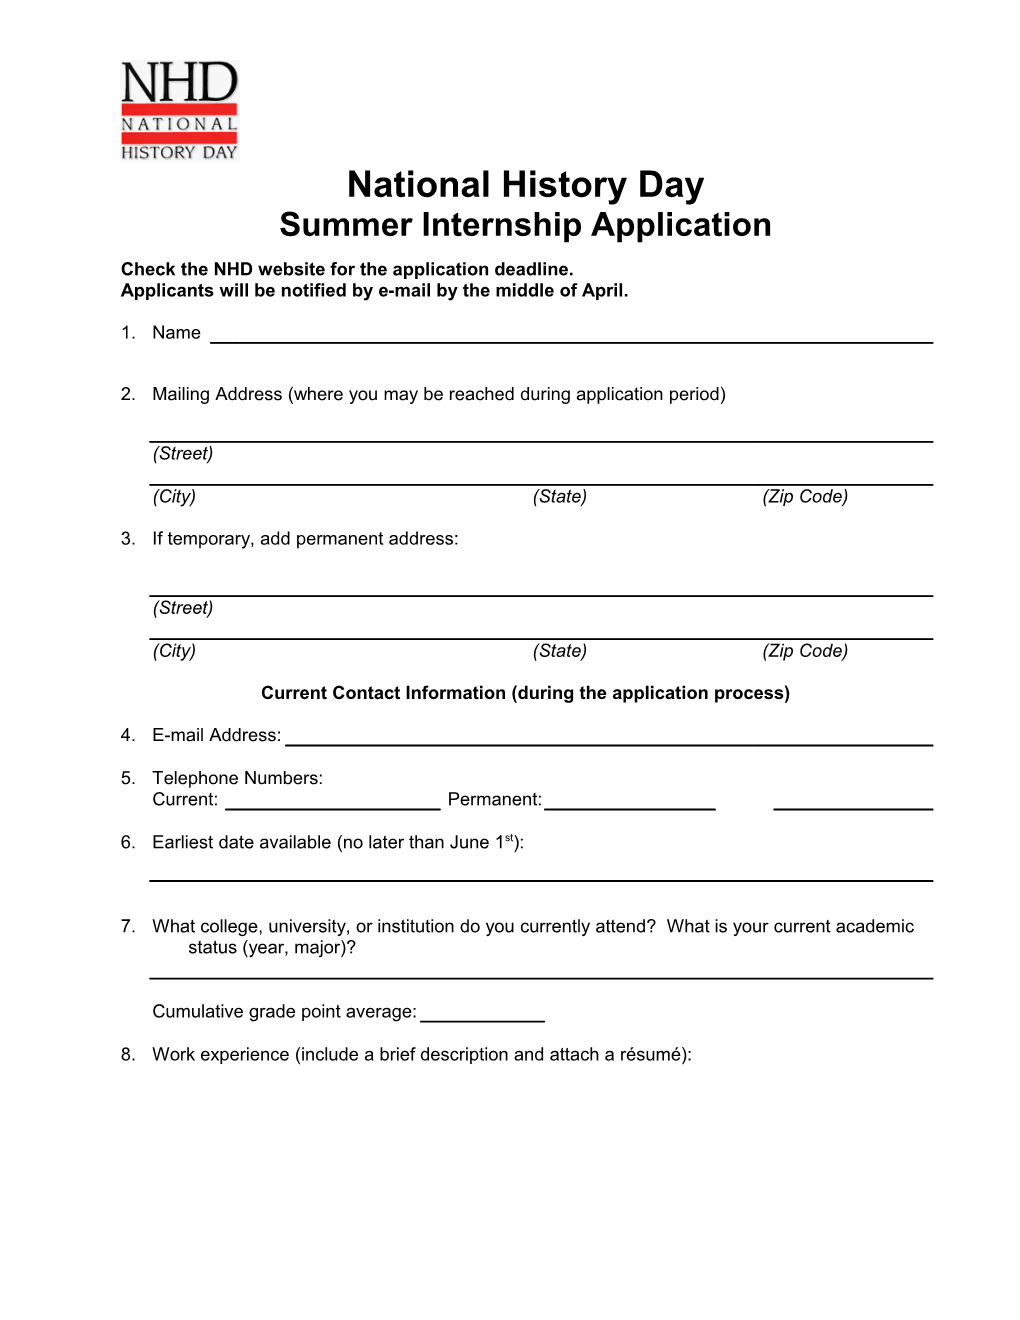 Check the NHD Website for the Application Deadline